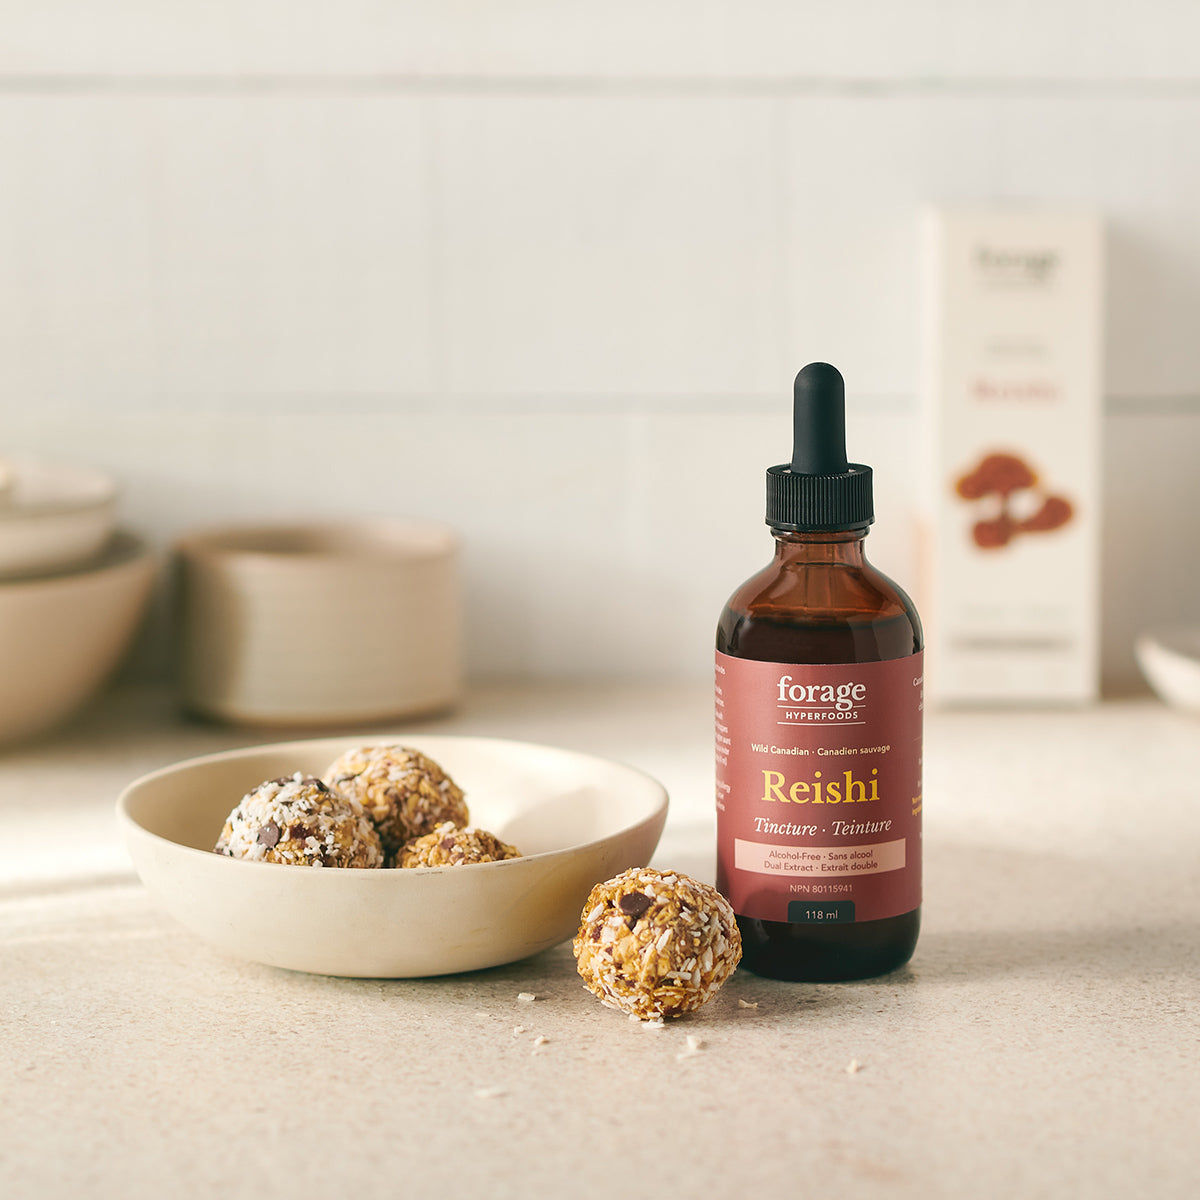 A tincture bottle of Alcohol-Free Reishi Tincture from Forage Hyperfoods next to a healthy date and nut ball showing the products ease of use